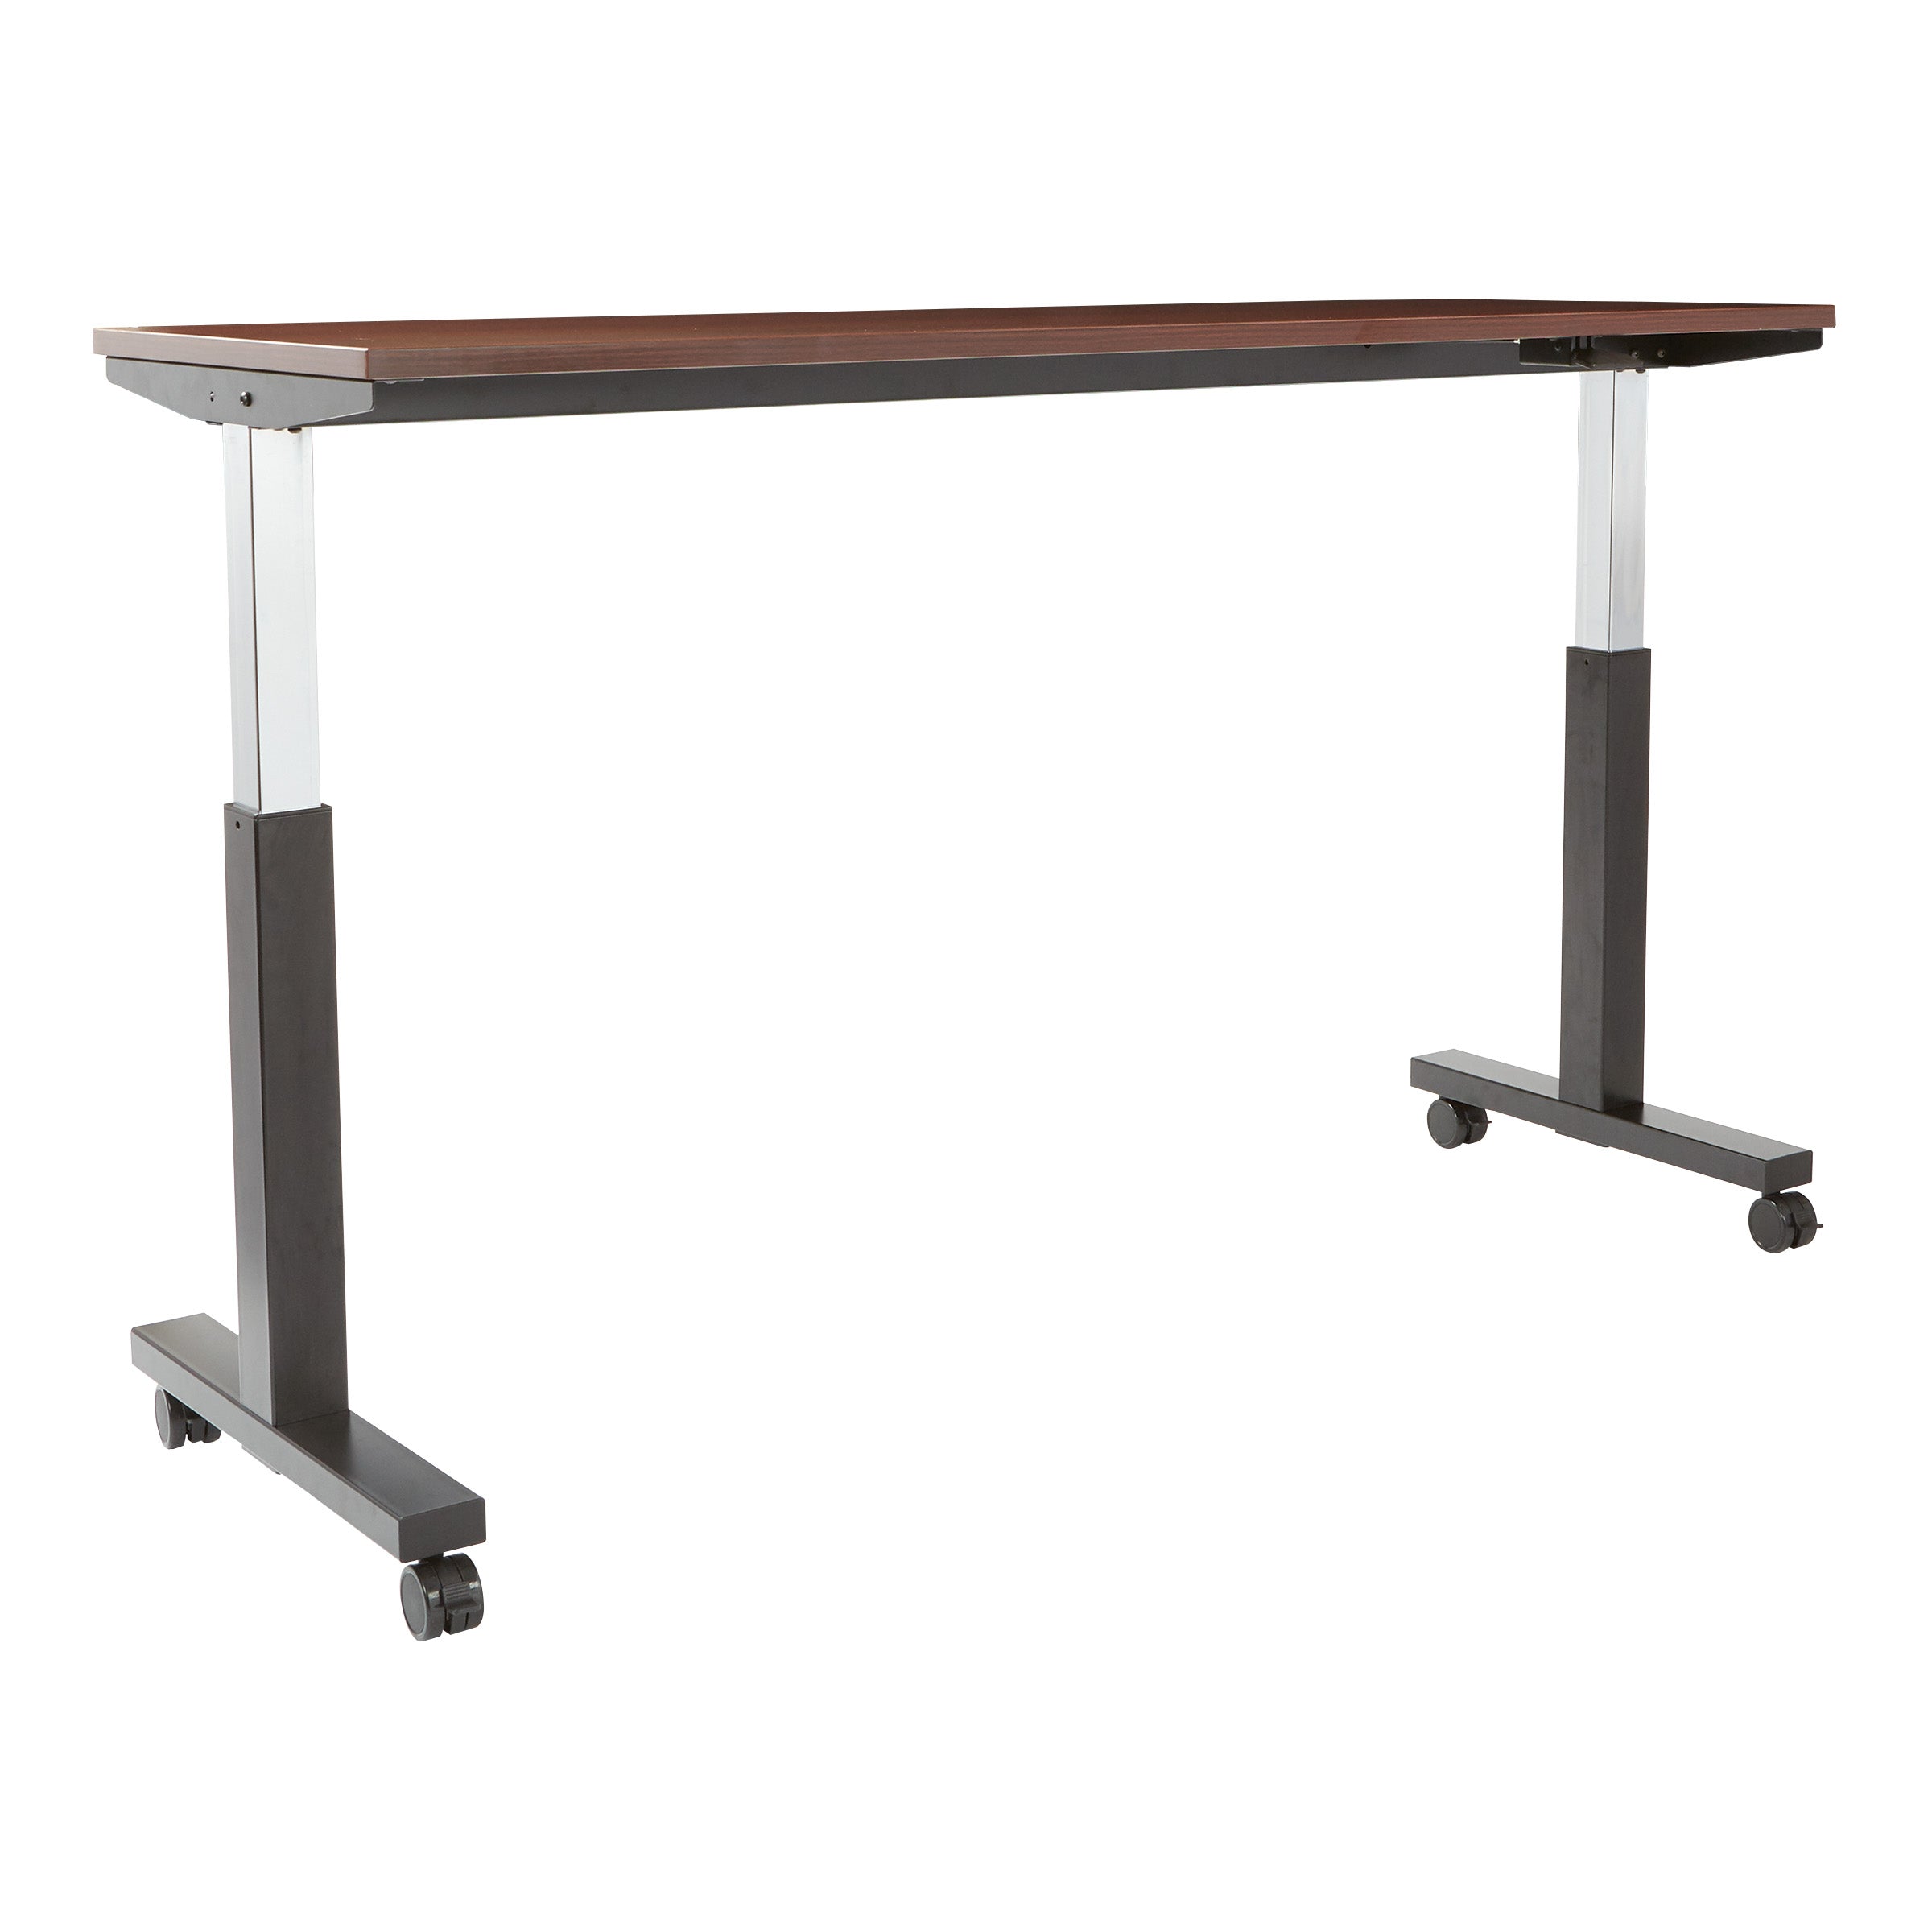 PHAT2472 - Mobile 72"W  Pneumatic Adjustable Height Desk by OSP